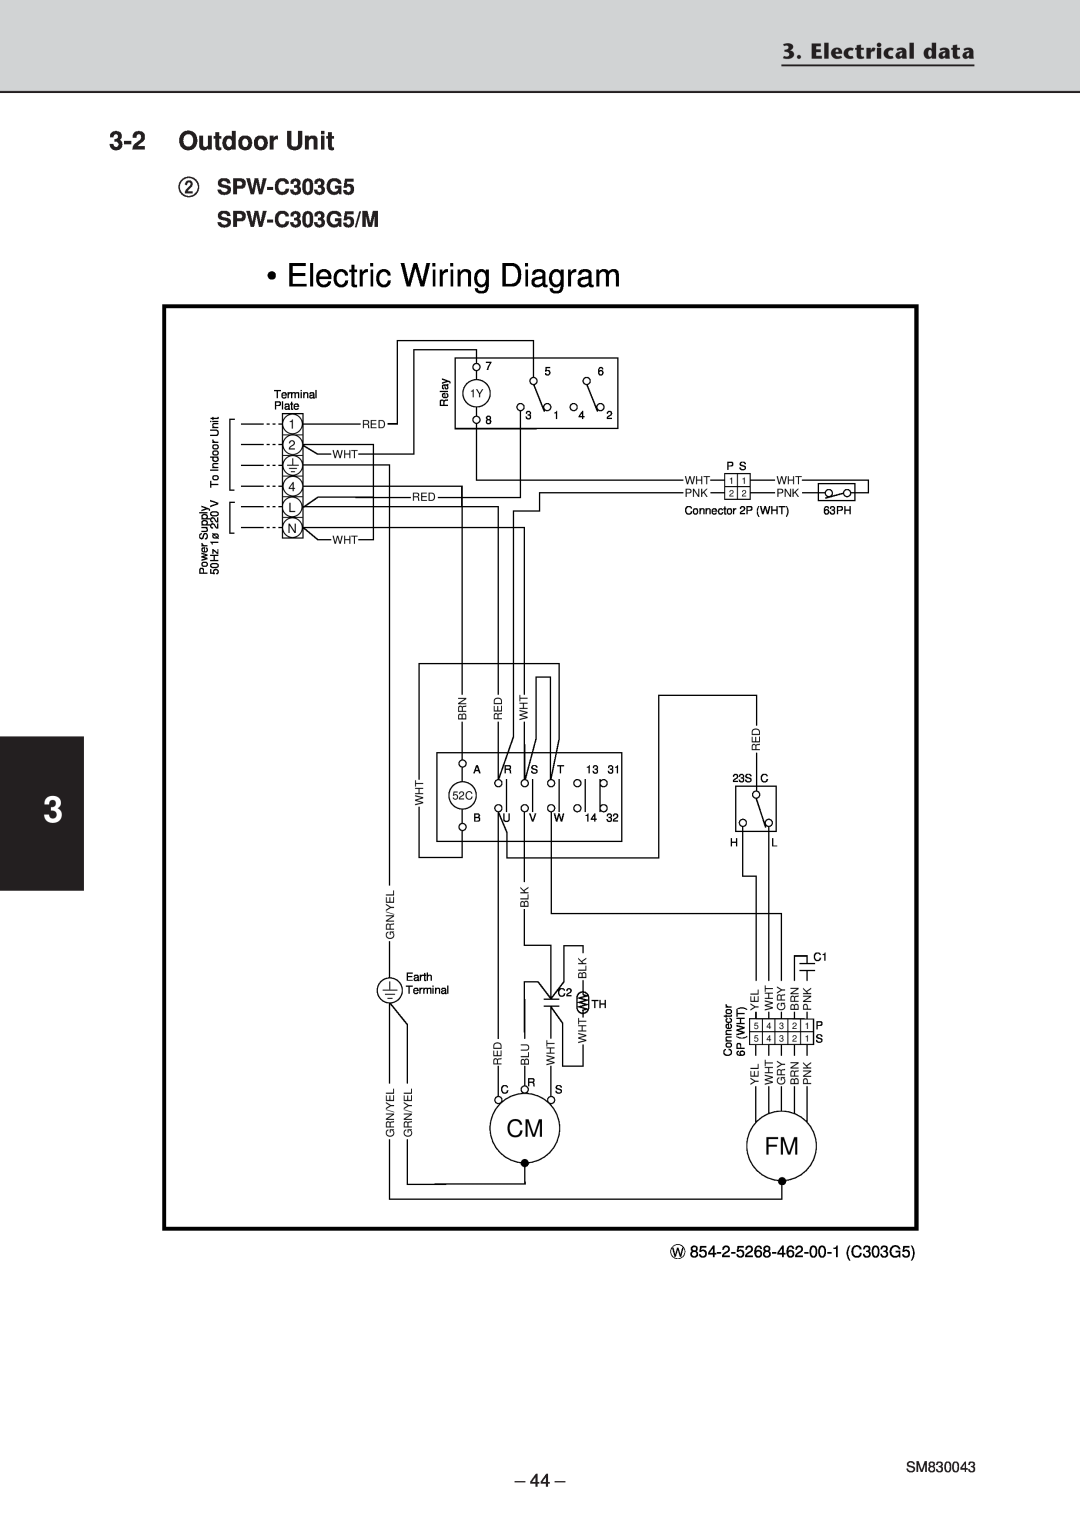 Sanyo SPW-C363G5, SPW-T363GS56 Electric Wiring Diagram, 3-2Outdoor Unit, Electrical data, 2SPW-C303G5 SPW-C303G5/M 